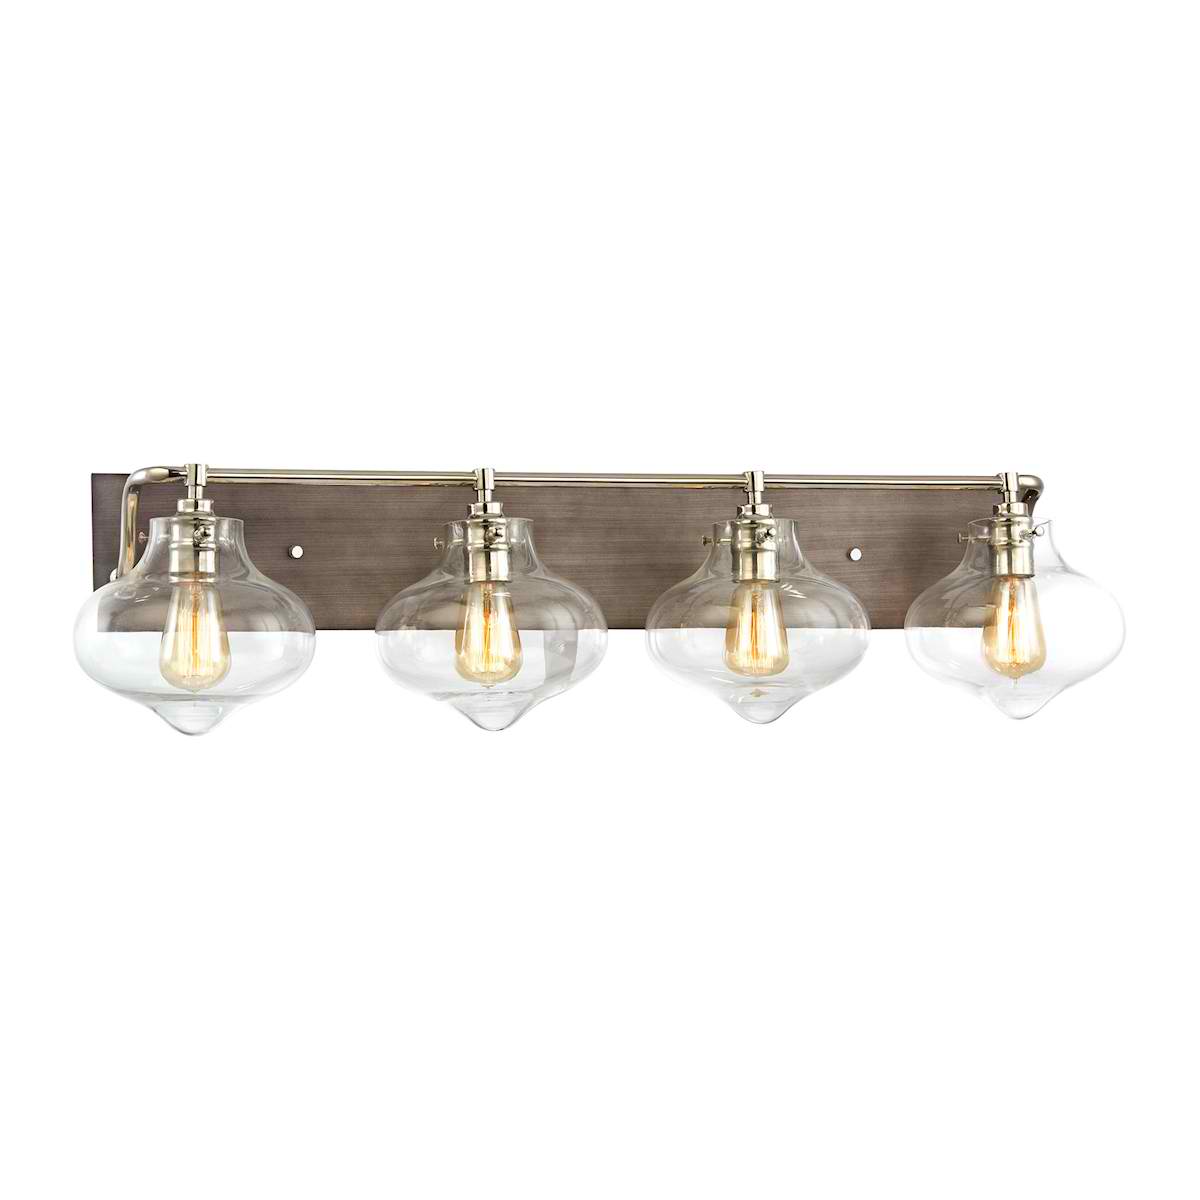 Kelsey 4 Light Vanity in Weathered Zinc with Polished Nickel Accents